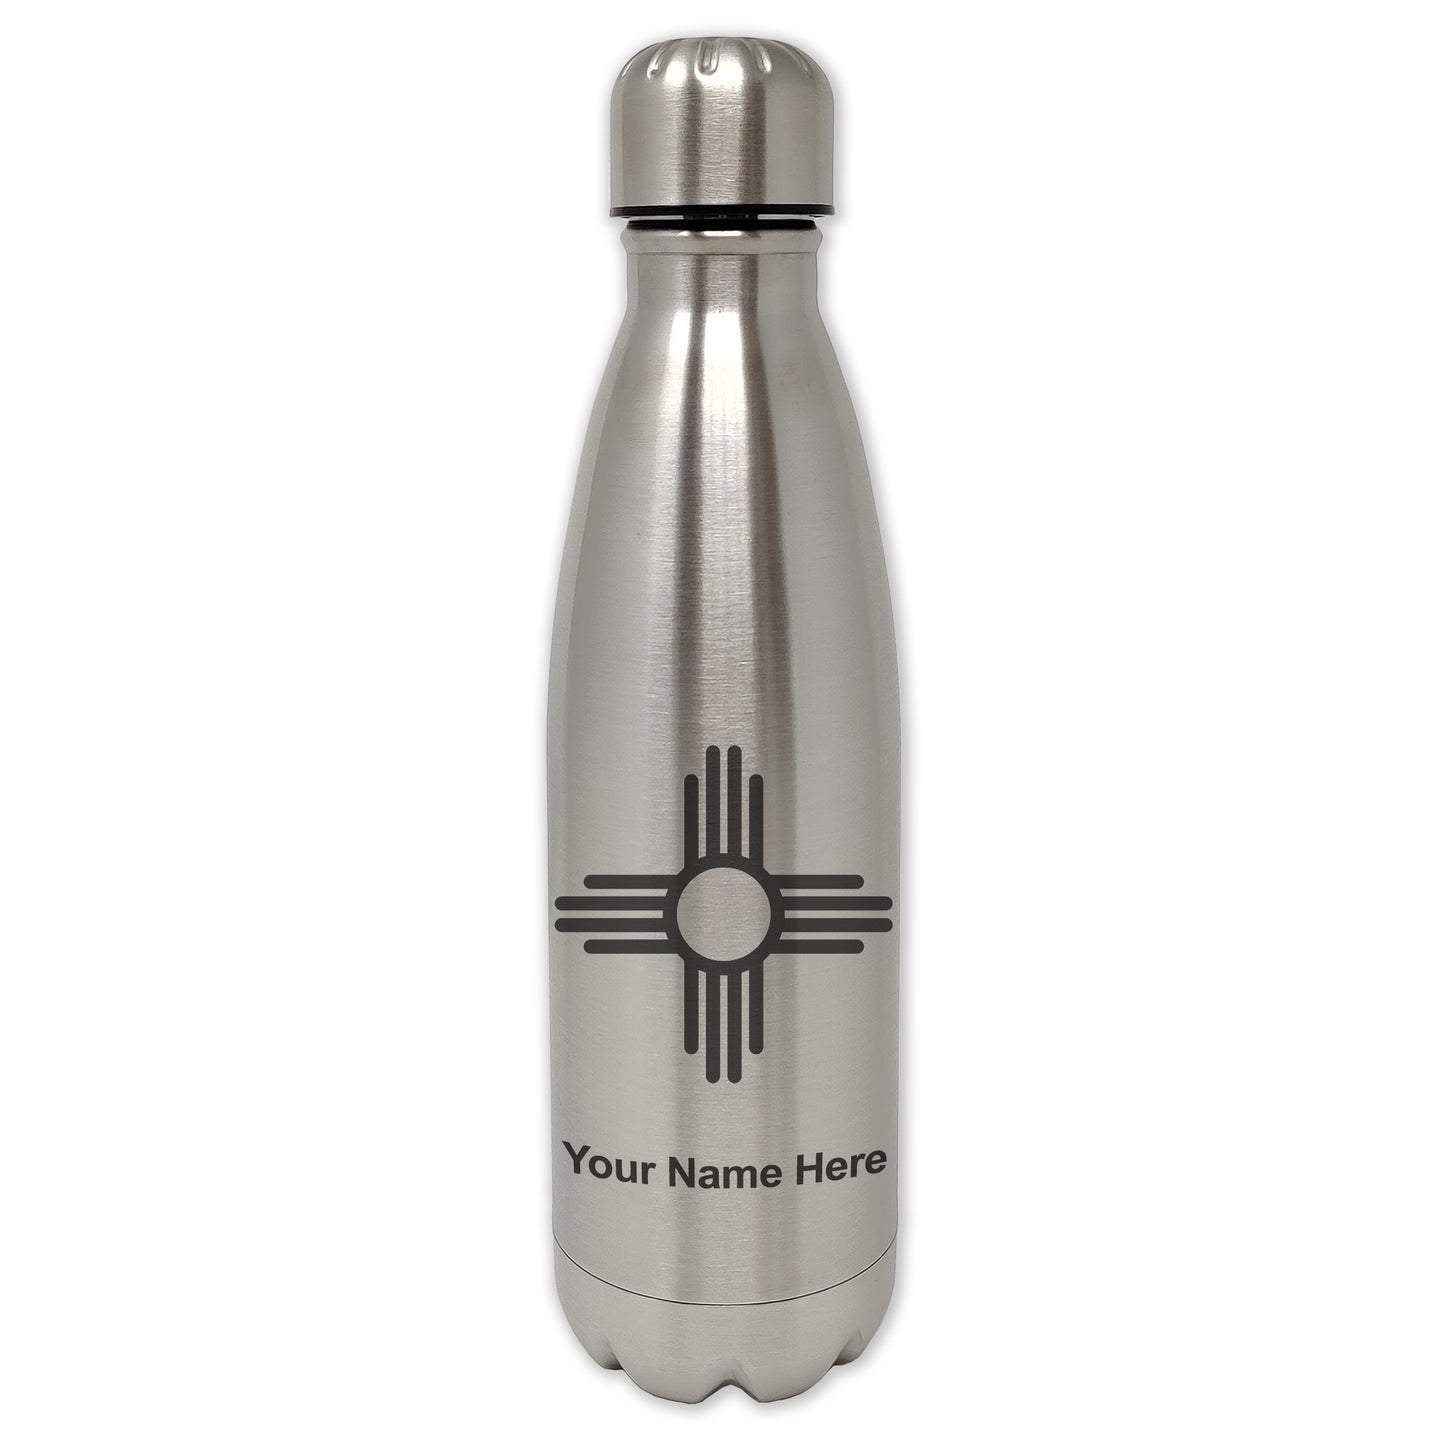 LaserGram Double Wall Water Bottle, Flag of New Mexico, Personalized Engraving Included